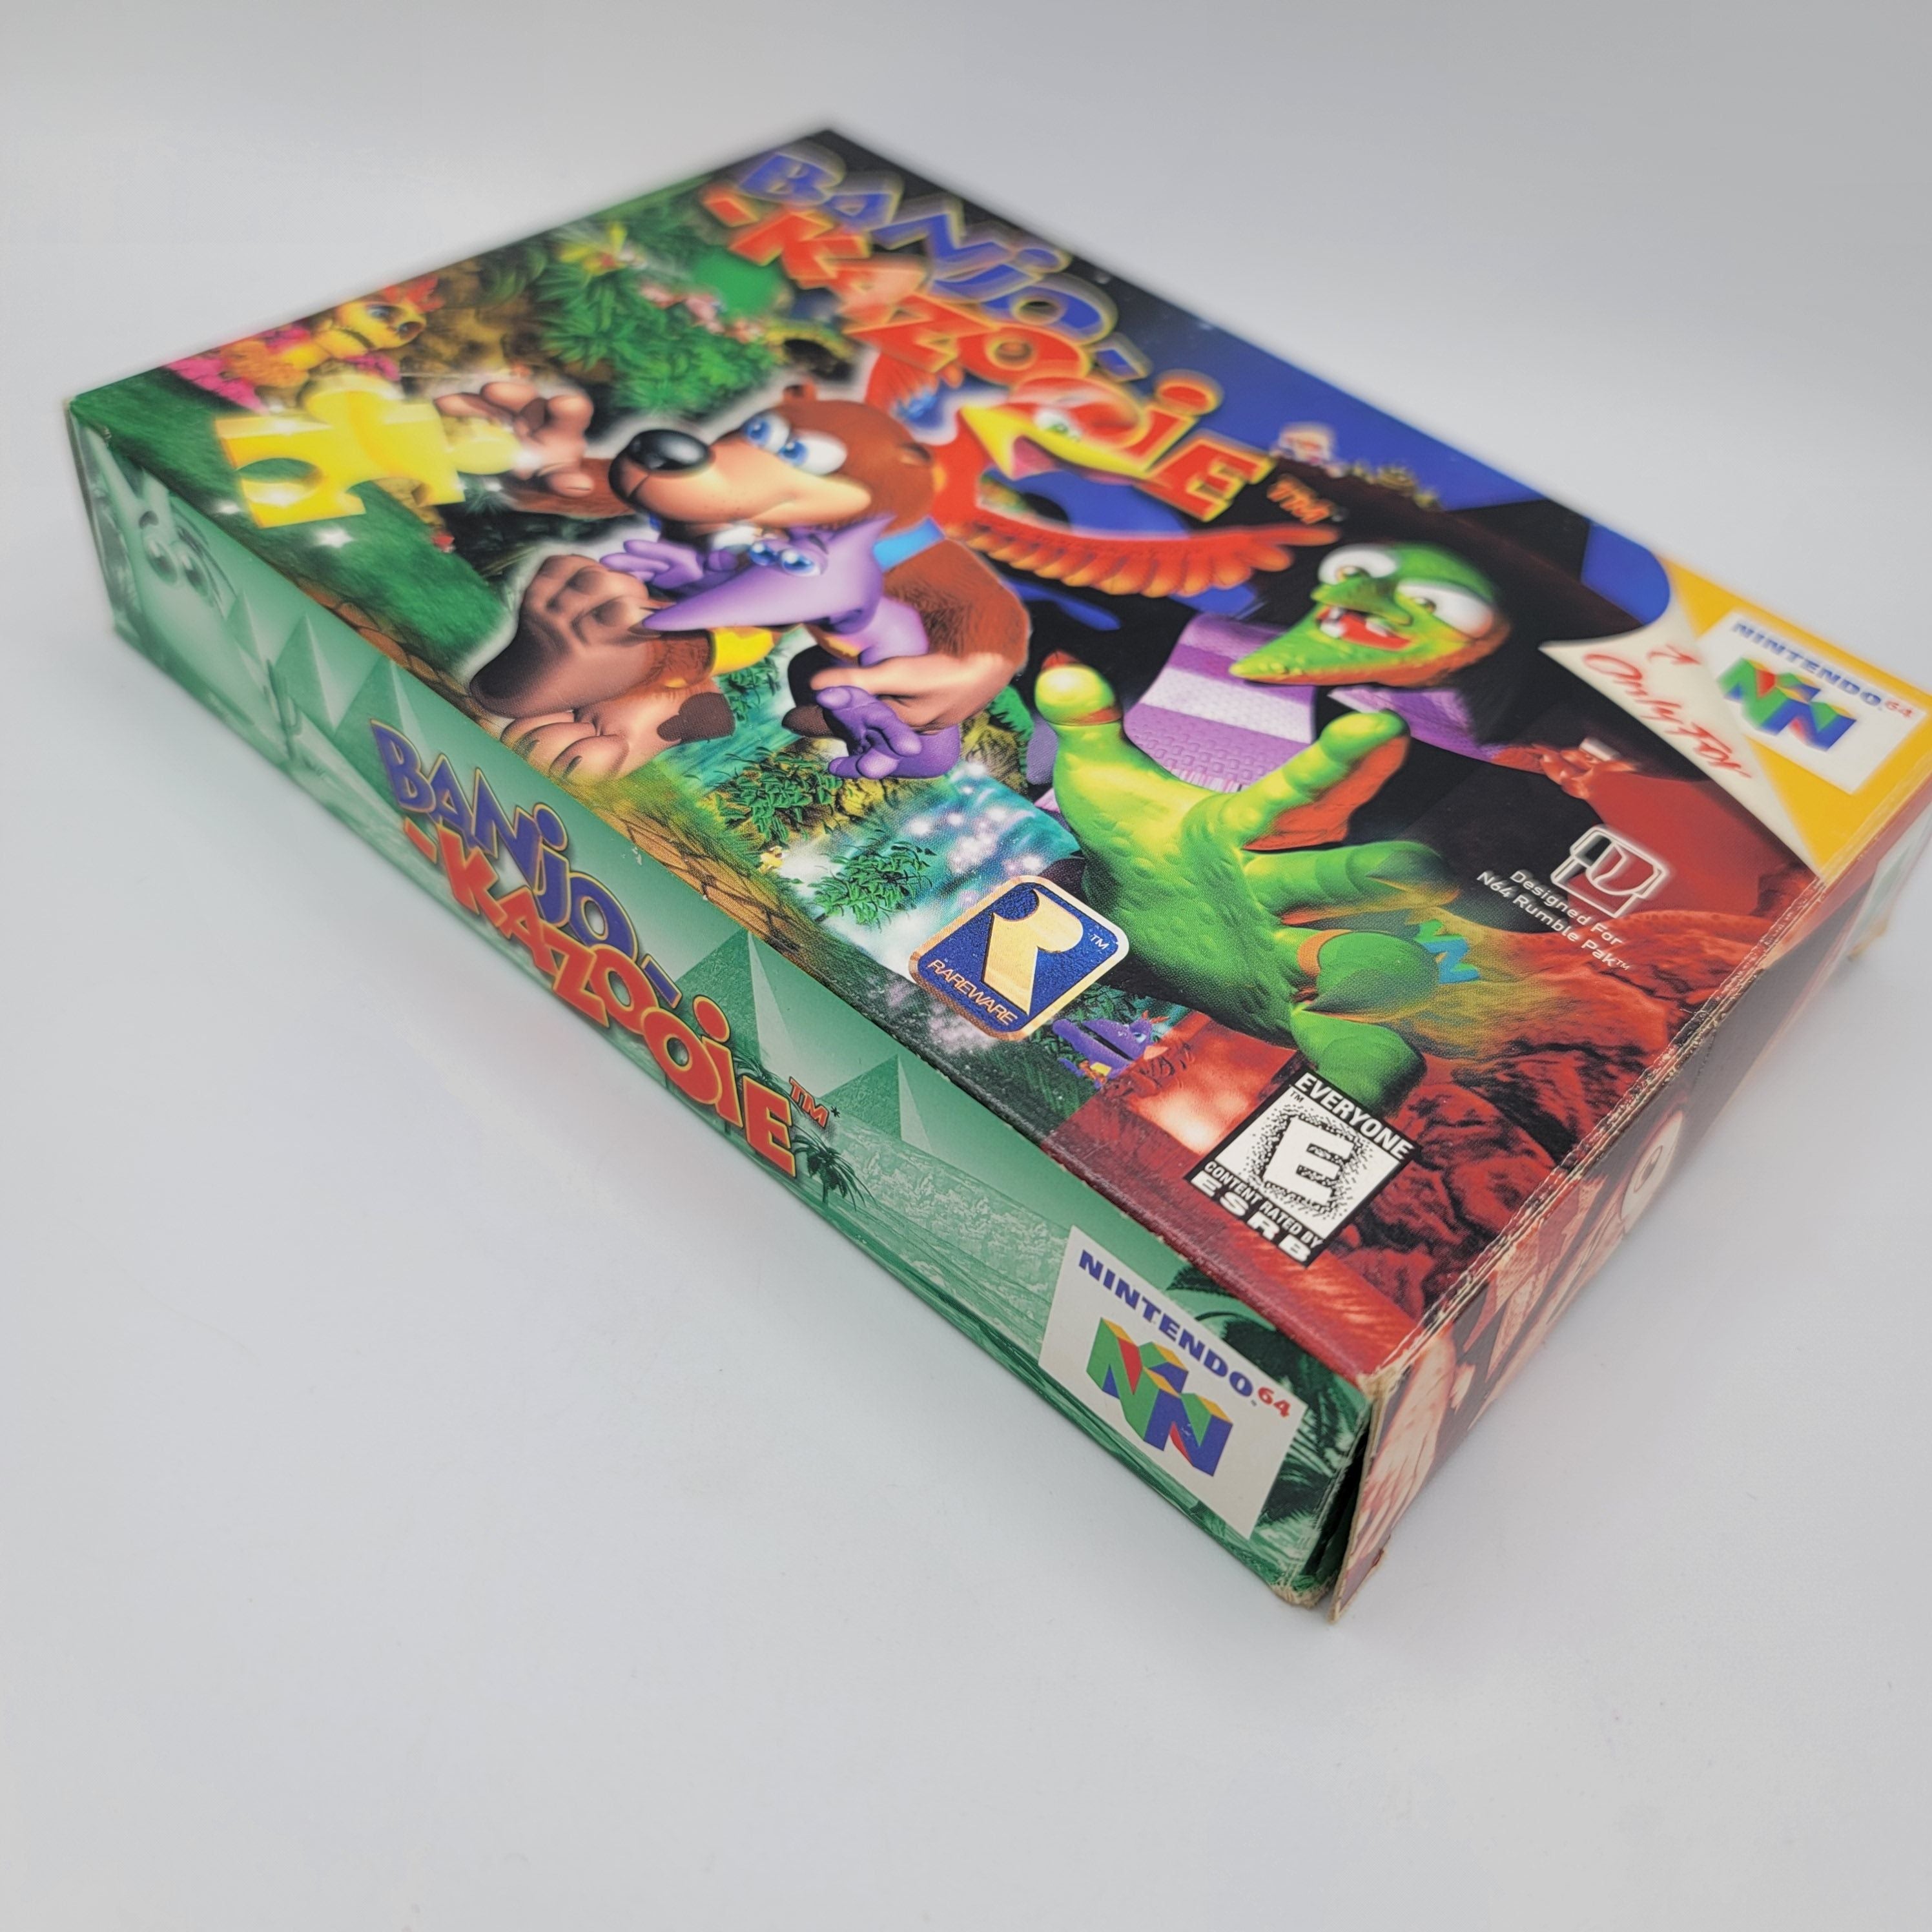 N64 - Banjo-Kazooie (Complete in Box / A / With Manual)